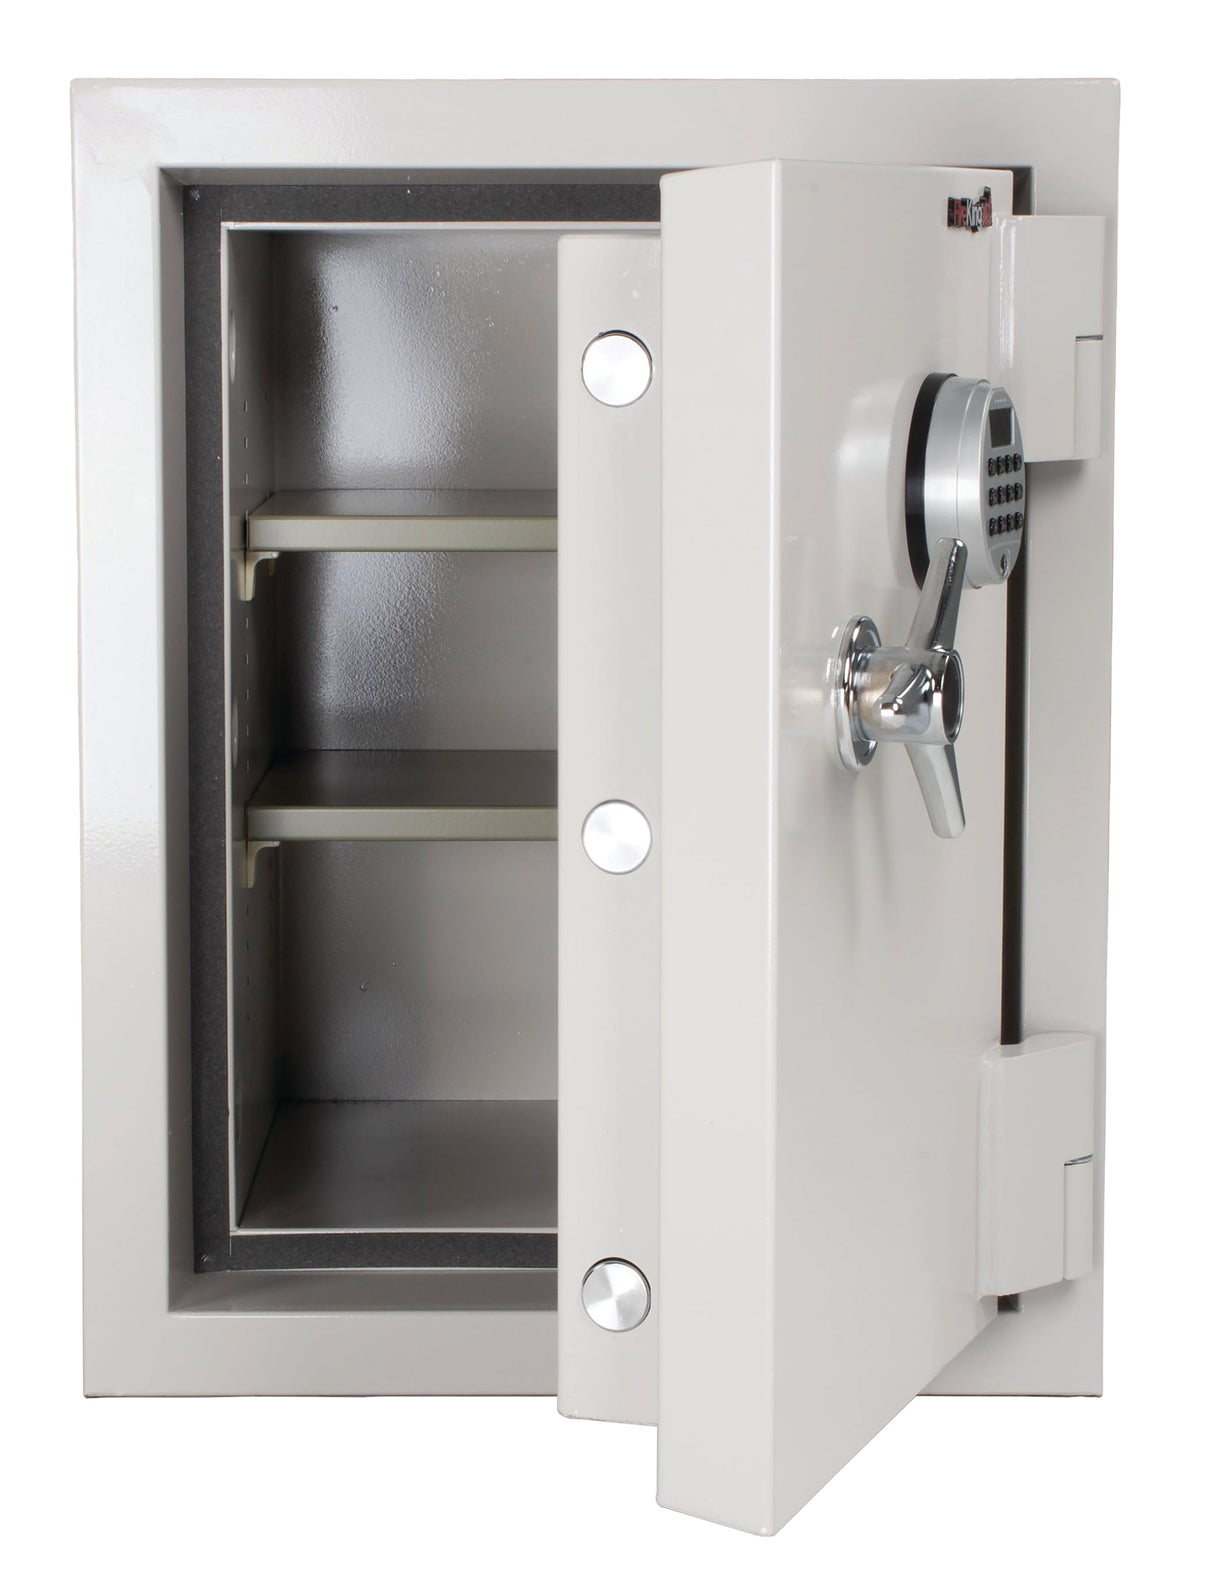 FireKing 1-Hour Fire-Rated Safe with Enhanced Security, Electronic Lock, & Adjustable Shelves